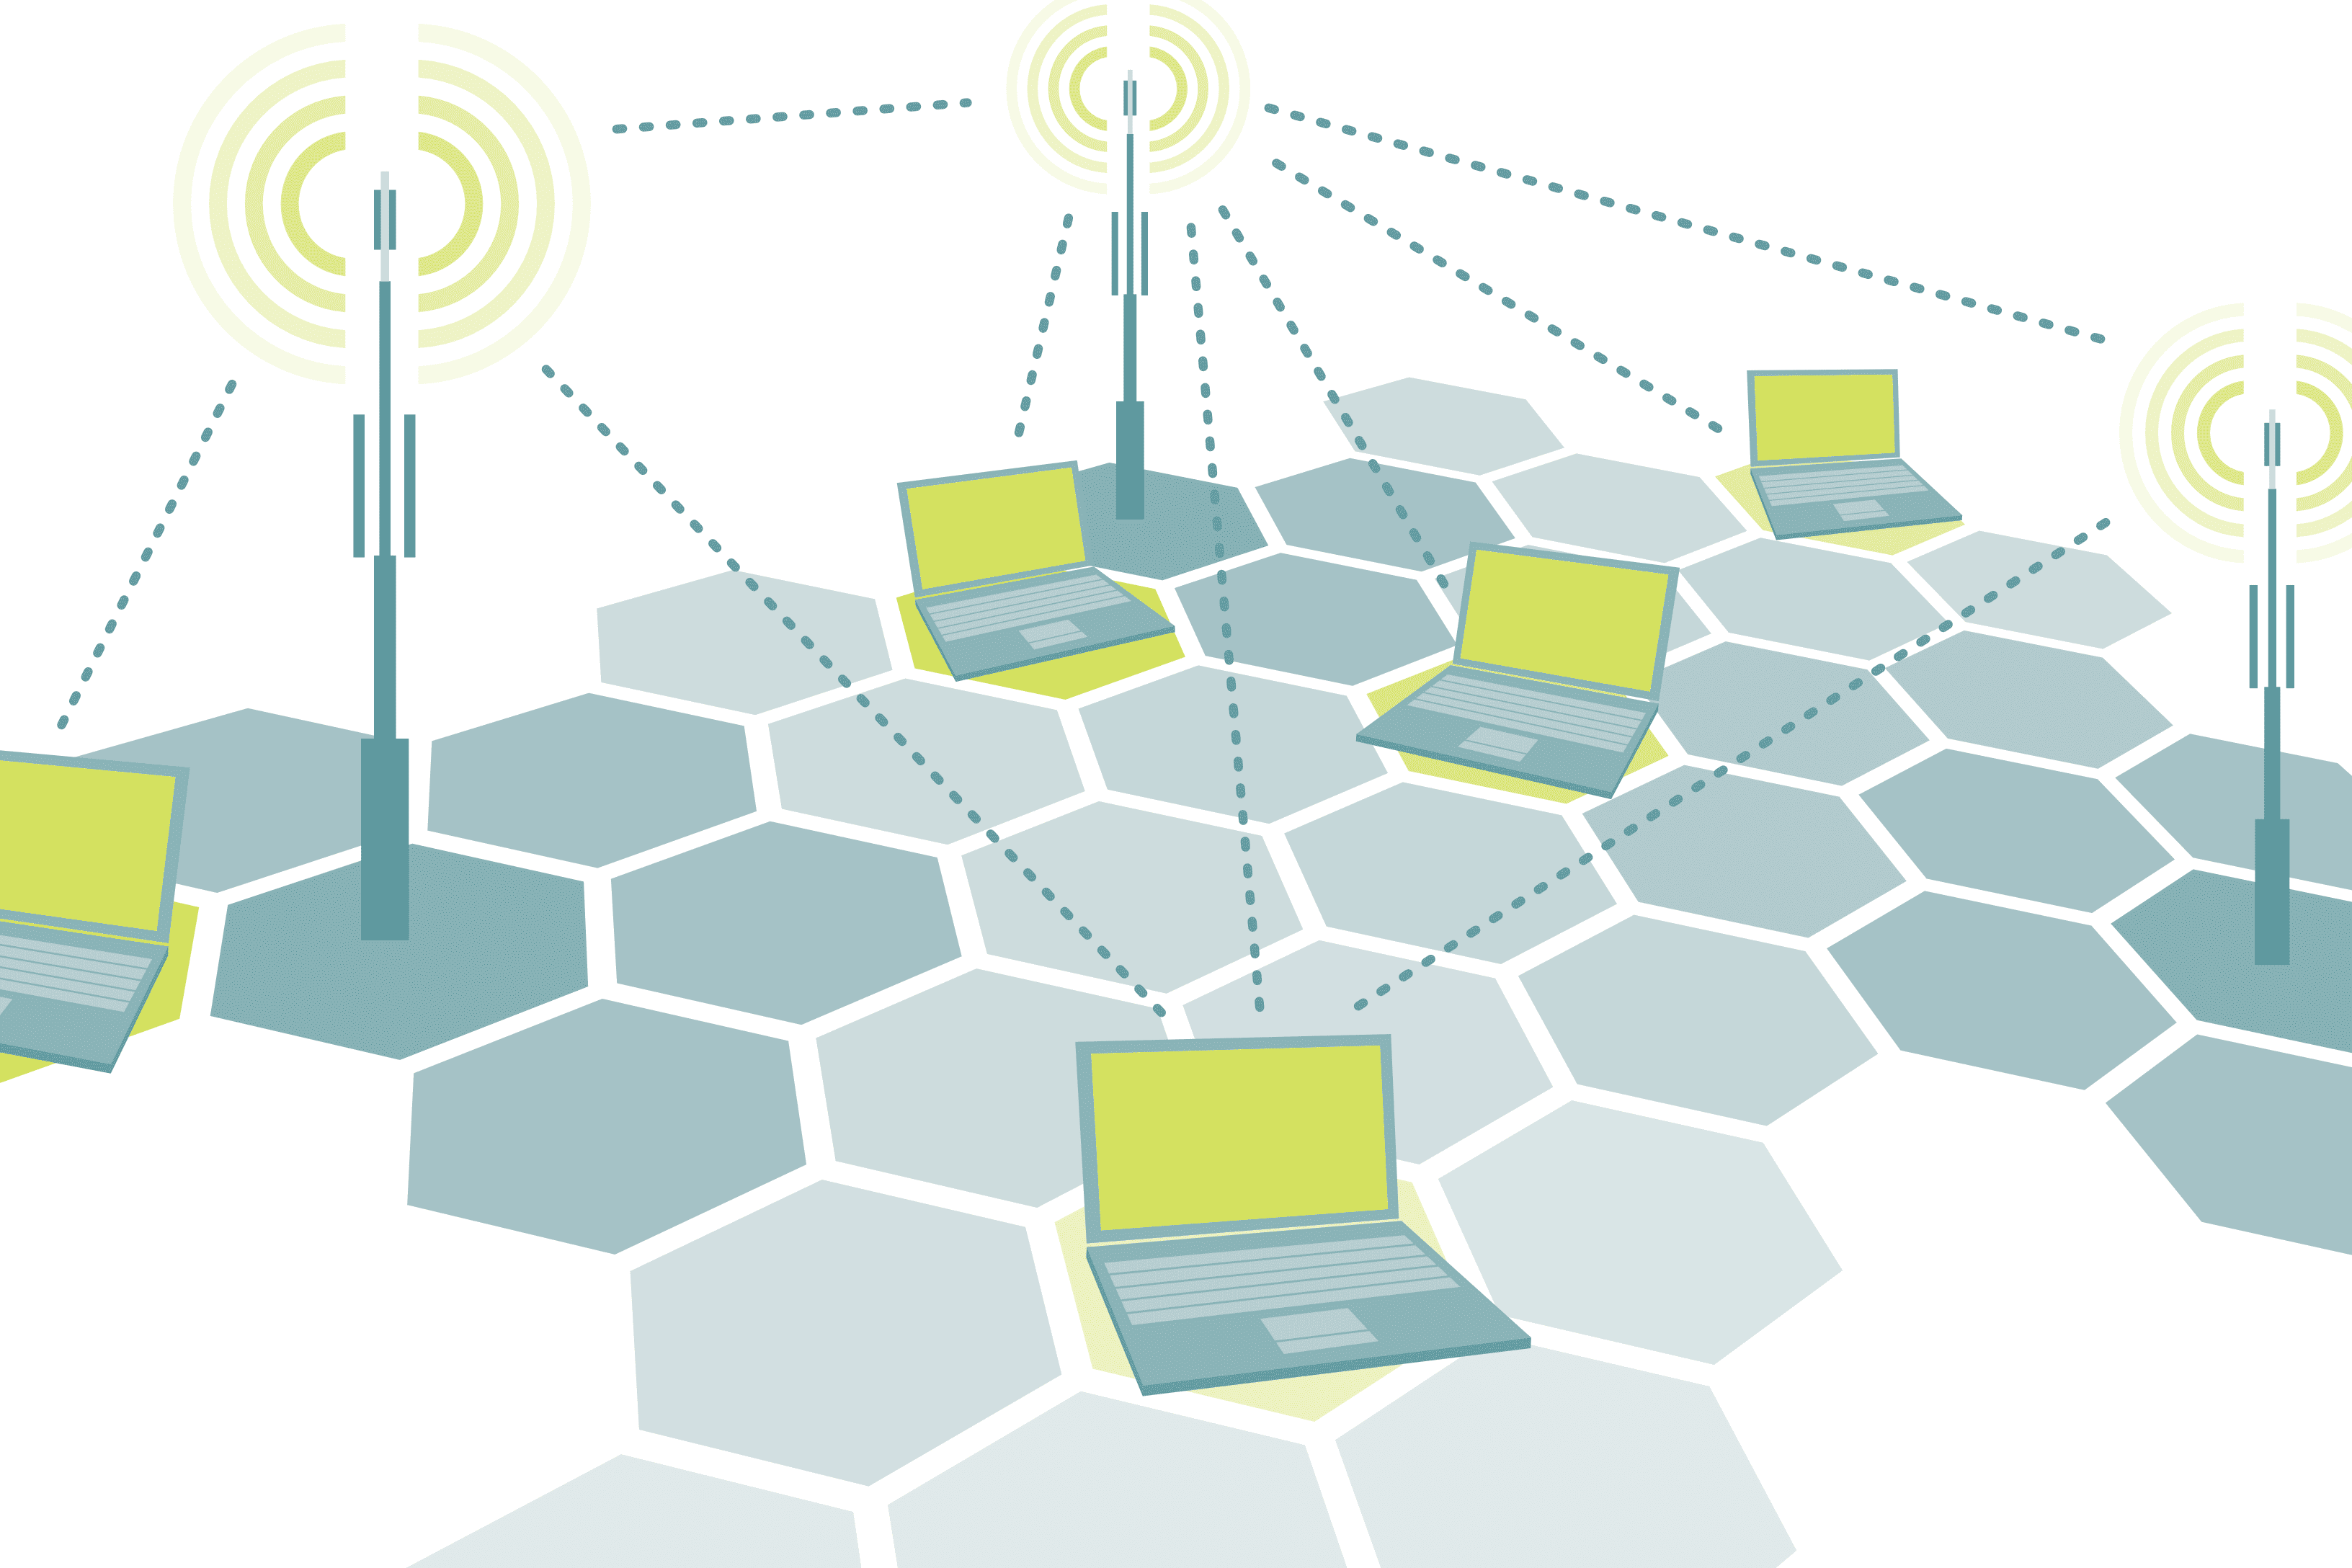 vector based image of a wireless computer network